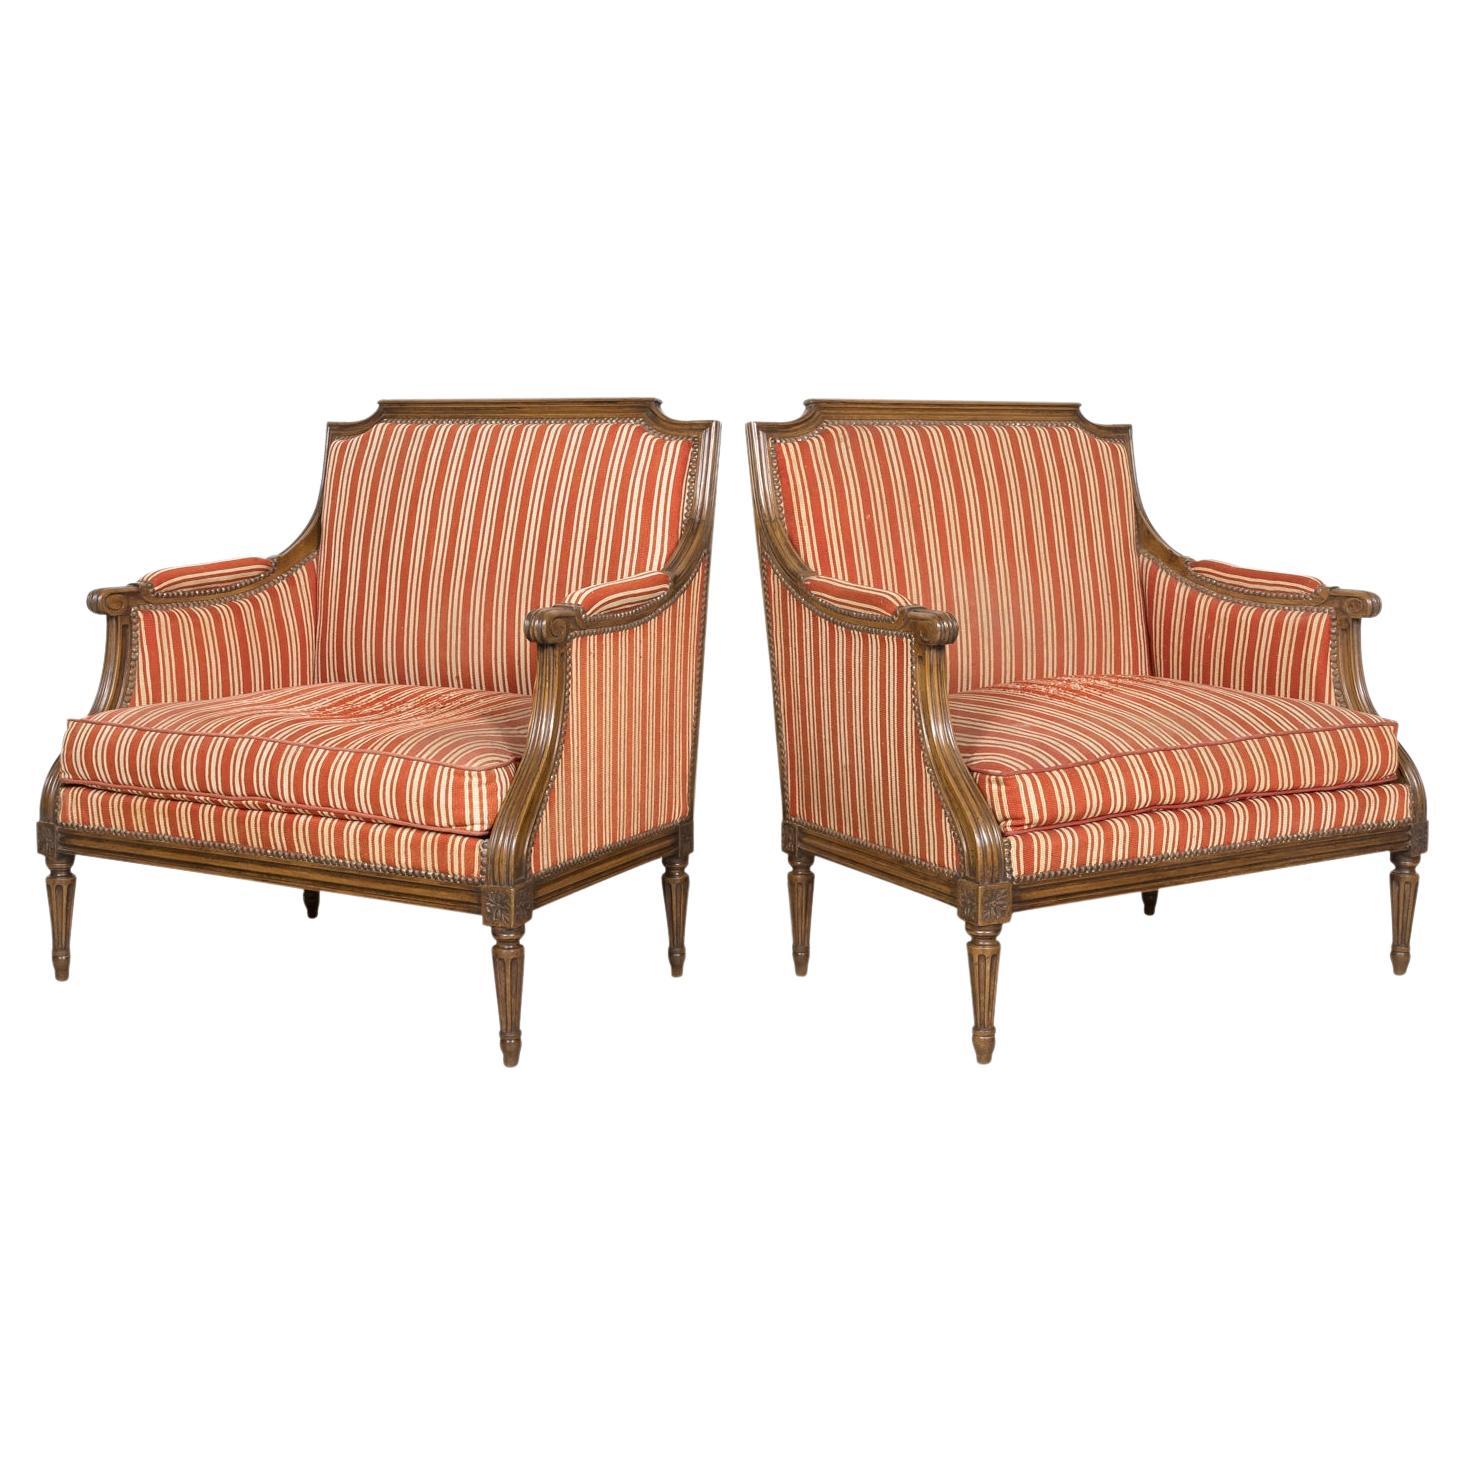 Pair of 19th Century French Louis XVI Style Oversized Bergere Marquise Armchairs For Sale